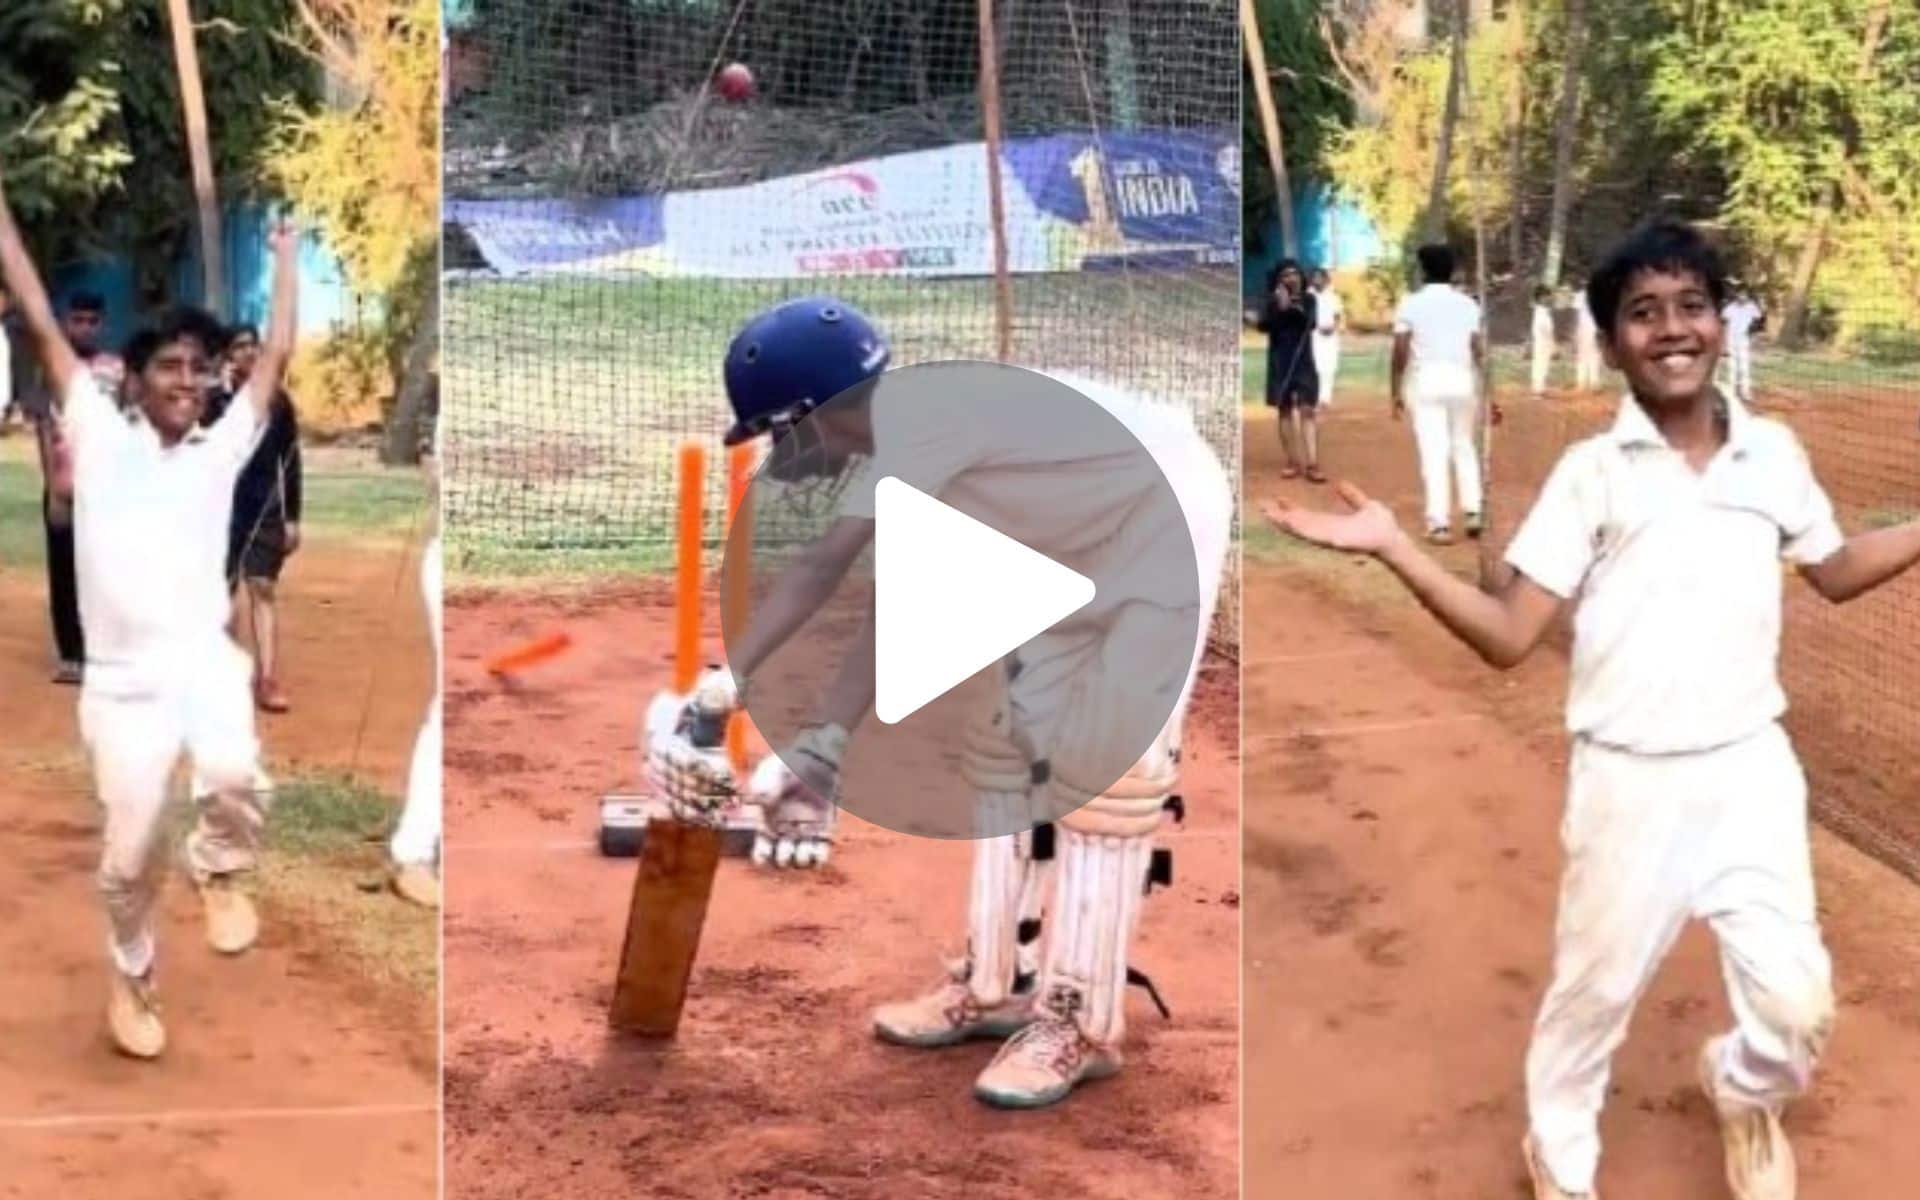 [Watch] Young Fan Channels Inner Jasprit Bumrah With Deadly Yorker